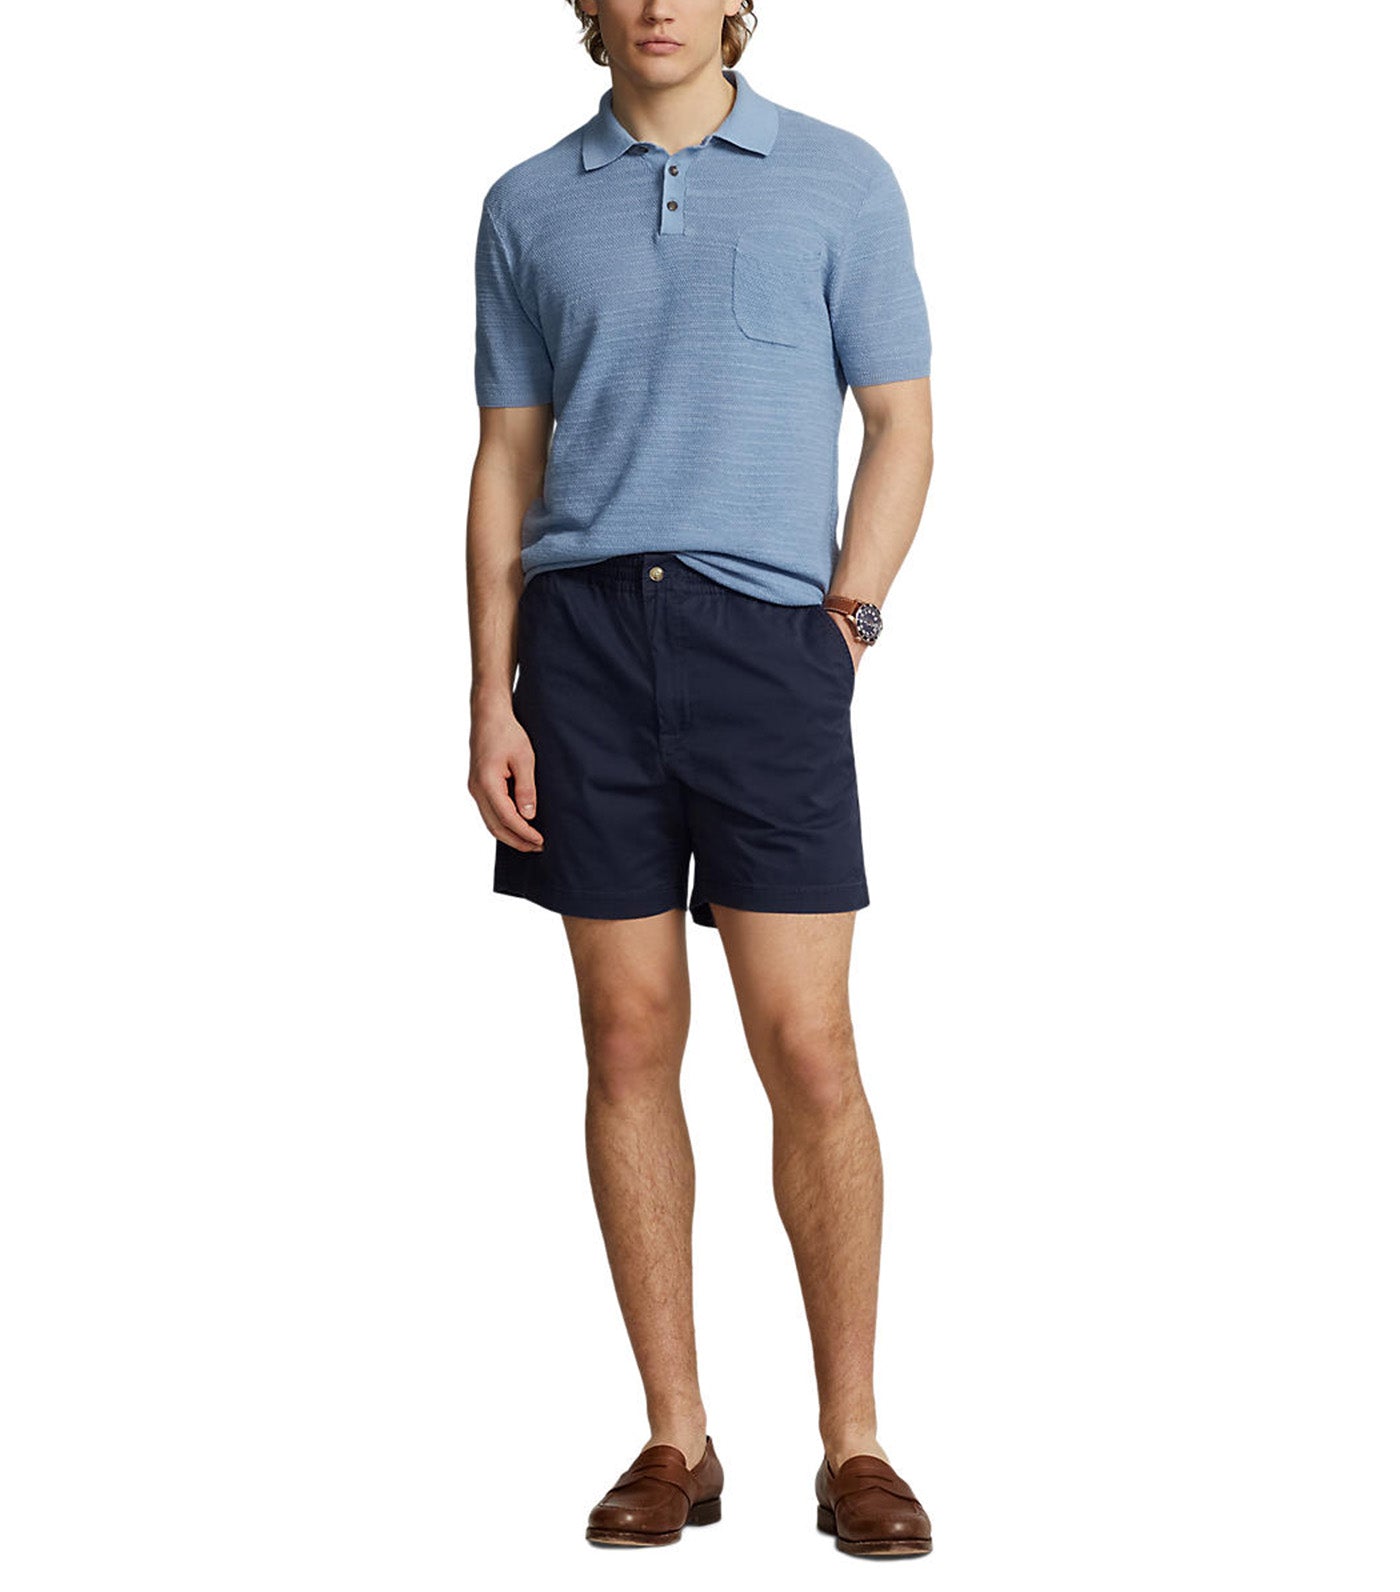 Men's 6-Inch Polo Prepster Stretch Chino Short Nautical Ink